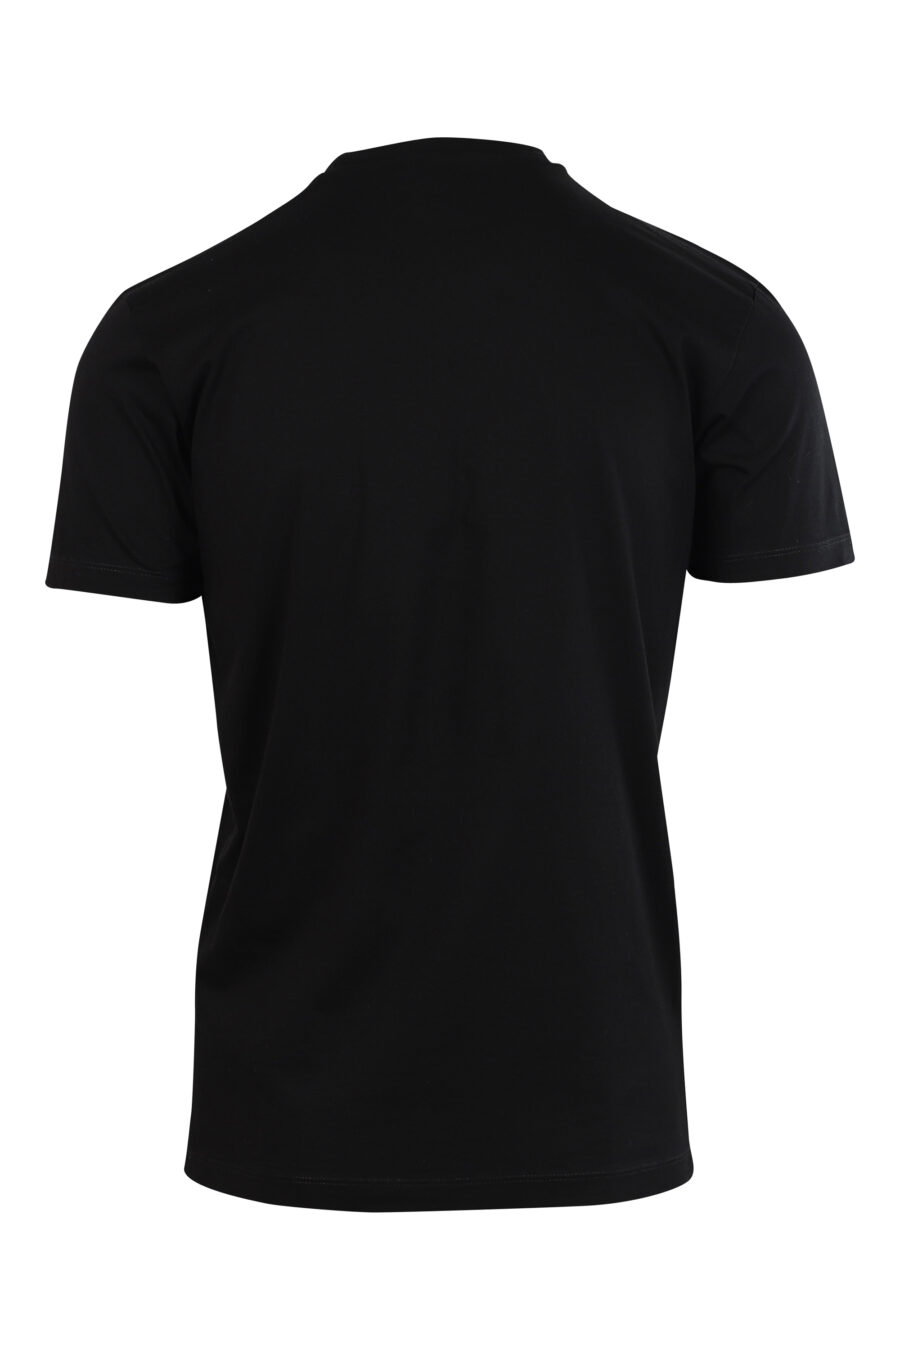 Black T-shirt with red logo - 8052134946053 2